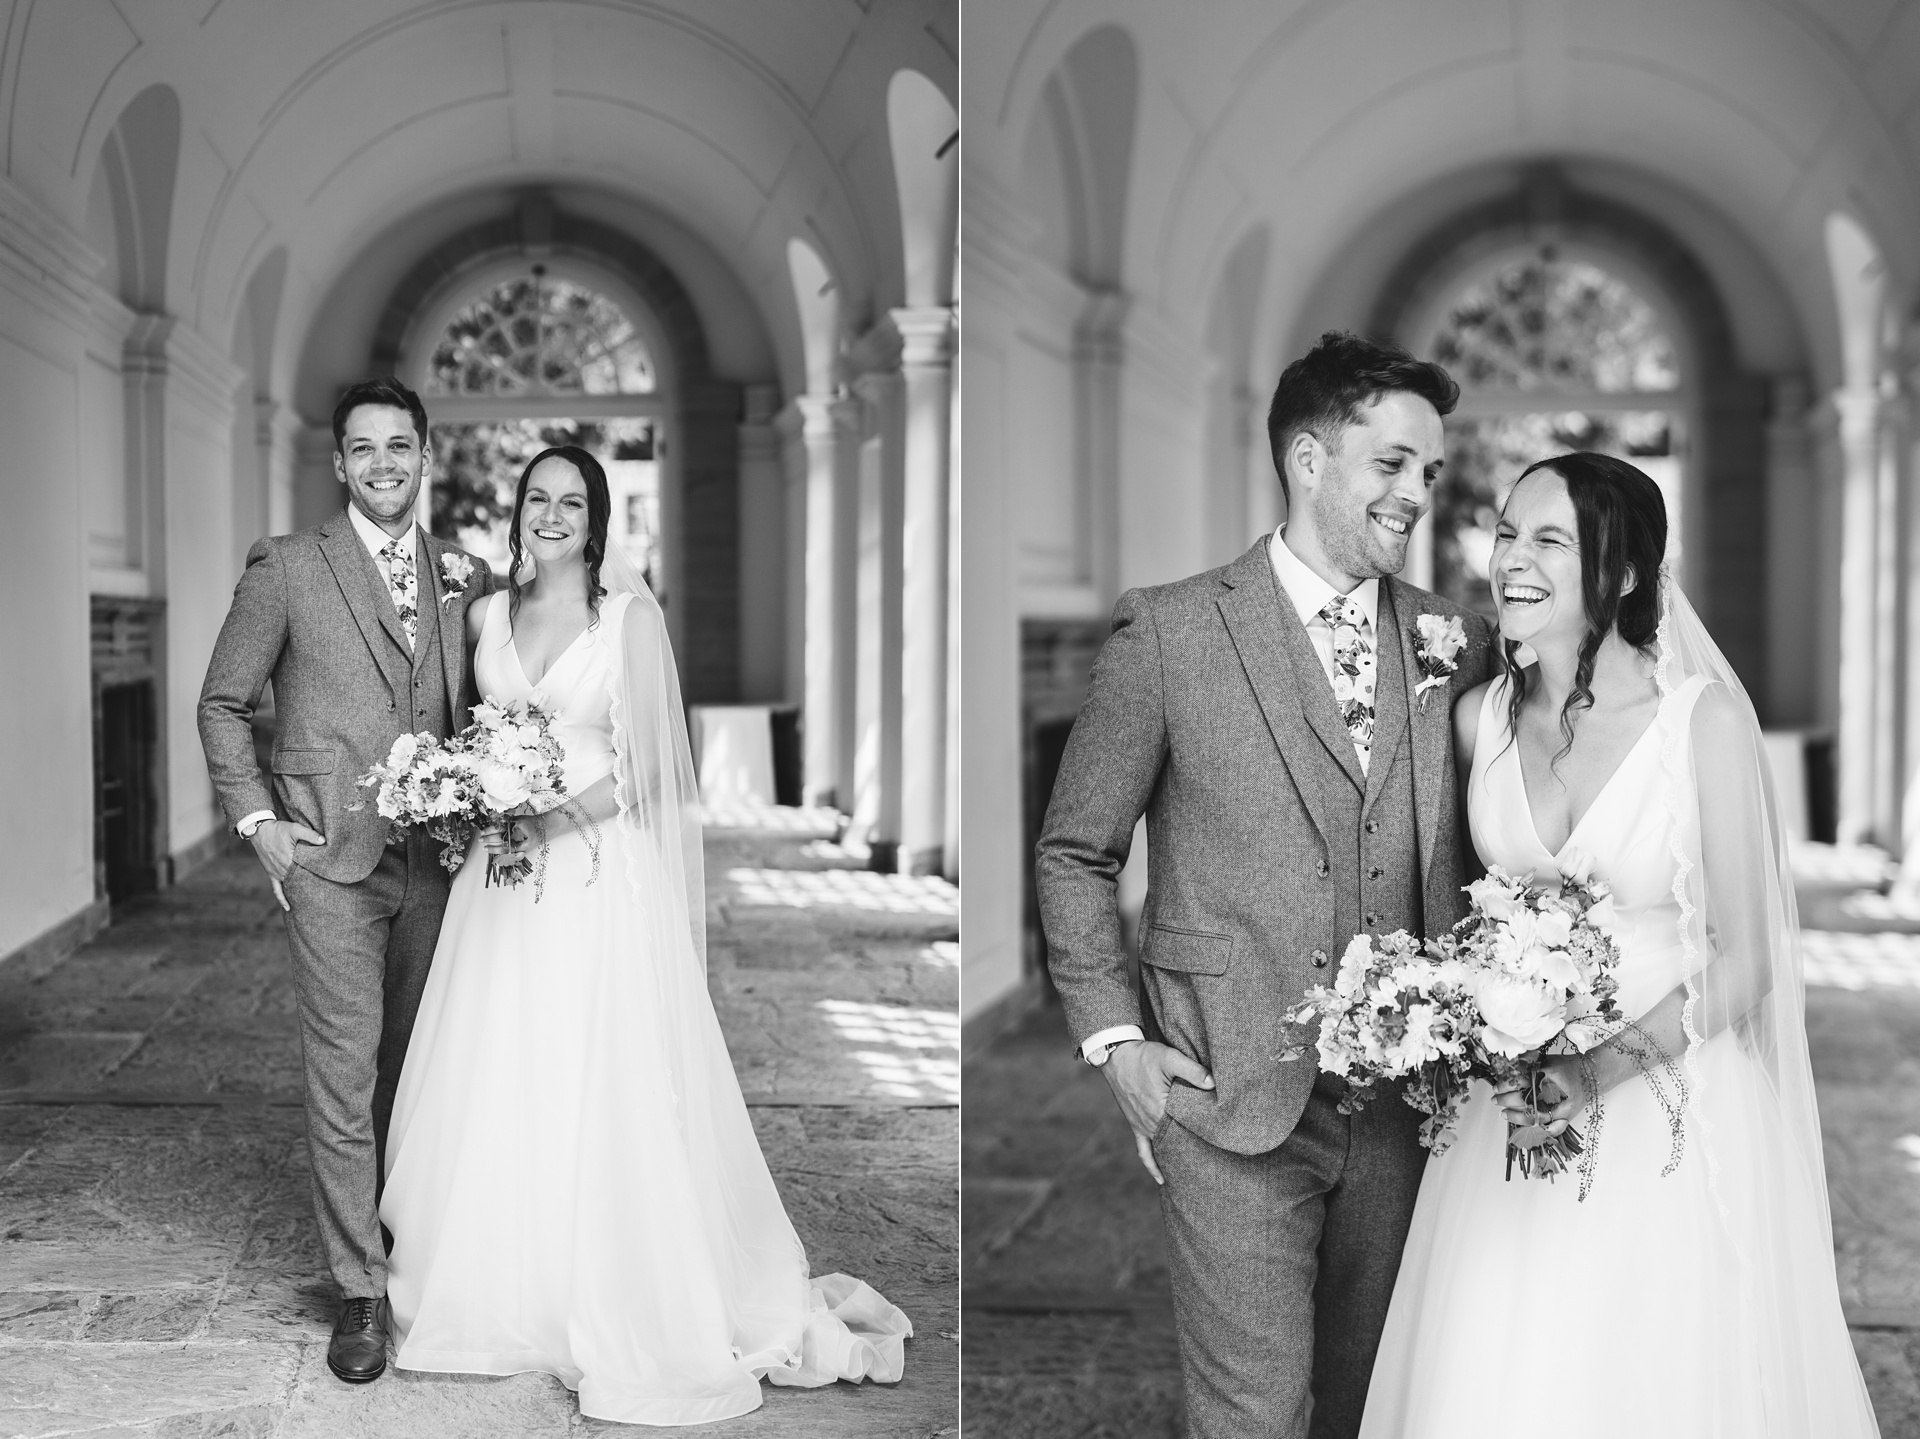 Portraits of a bride and groom at Hestercombe Gardens on their wedding day